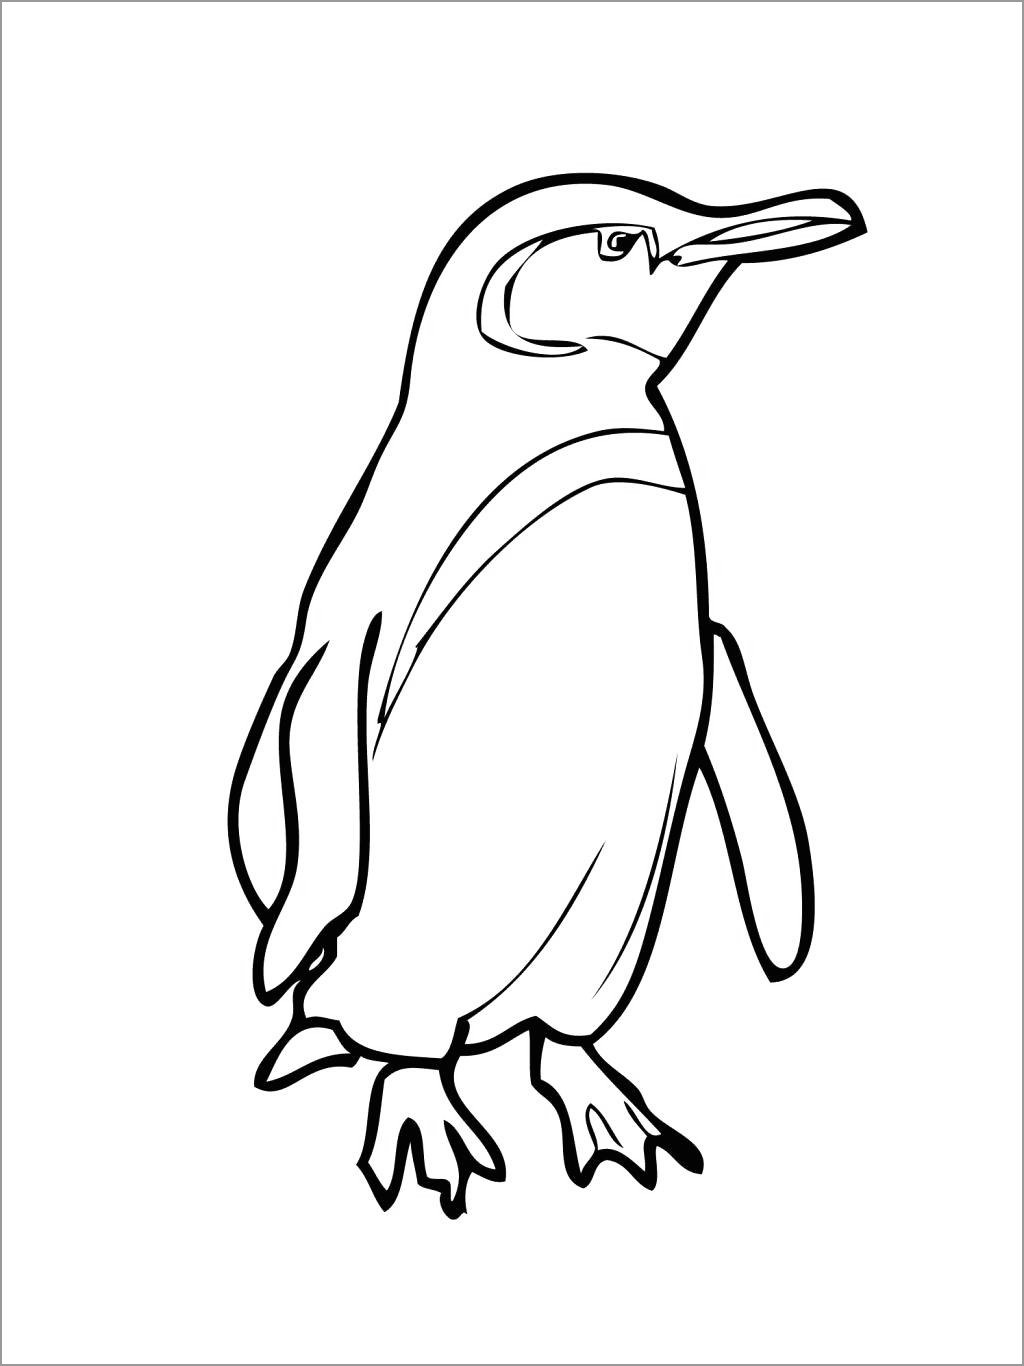 Coloring Page Of A Penguin